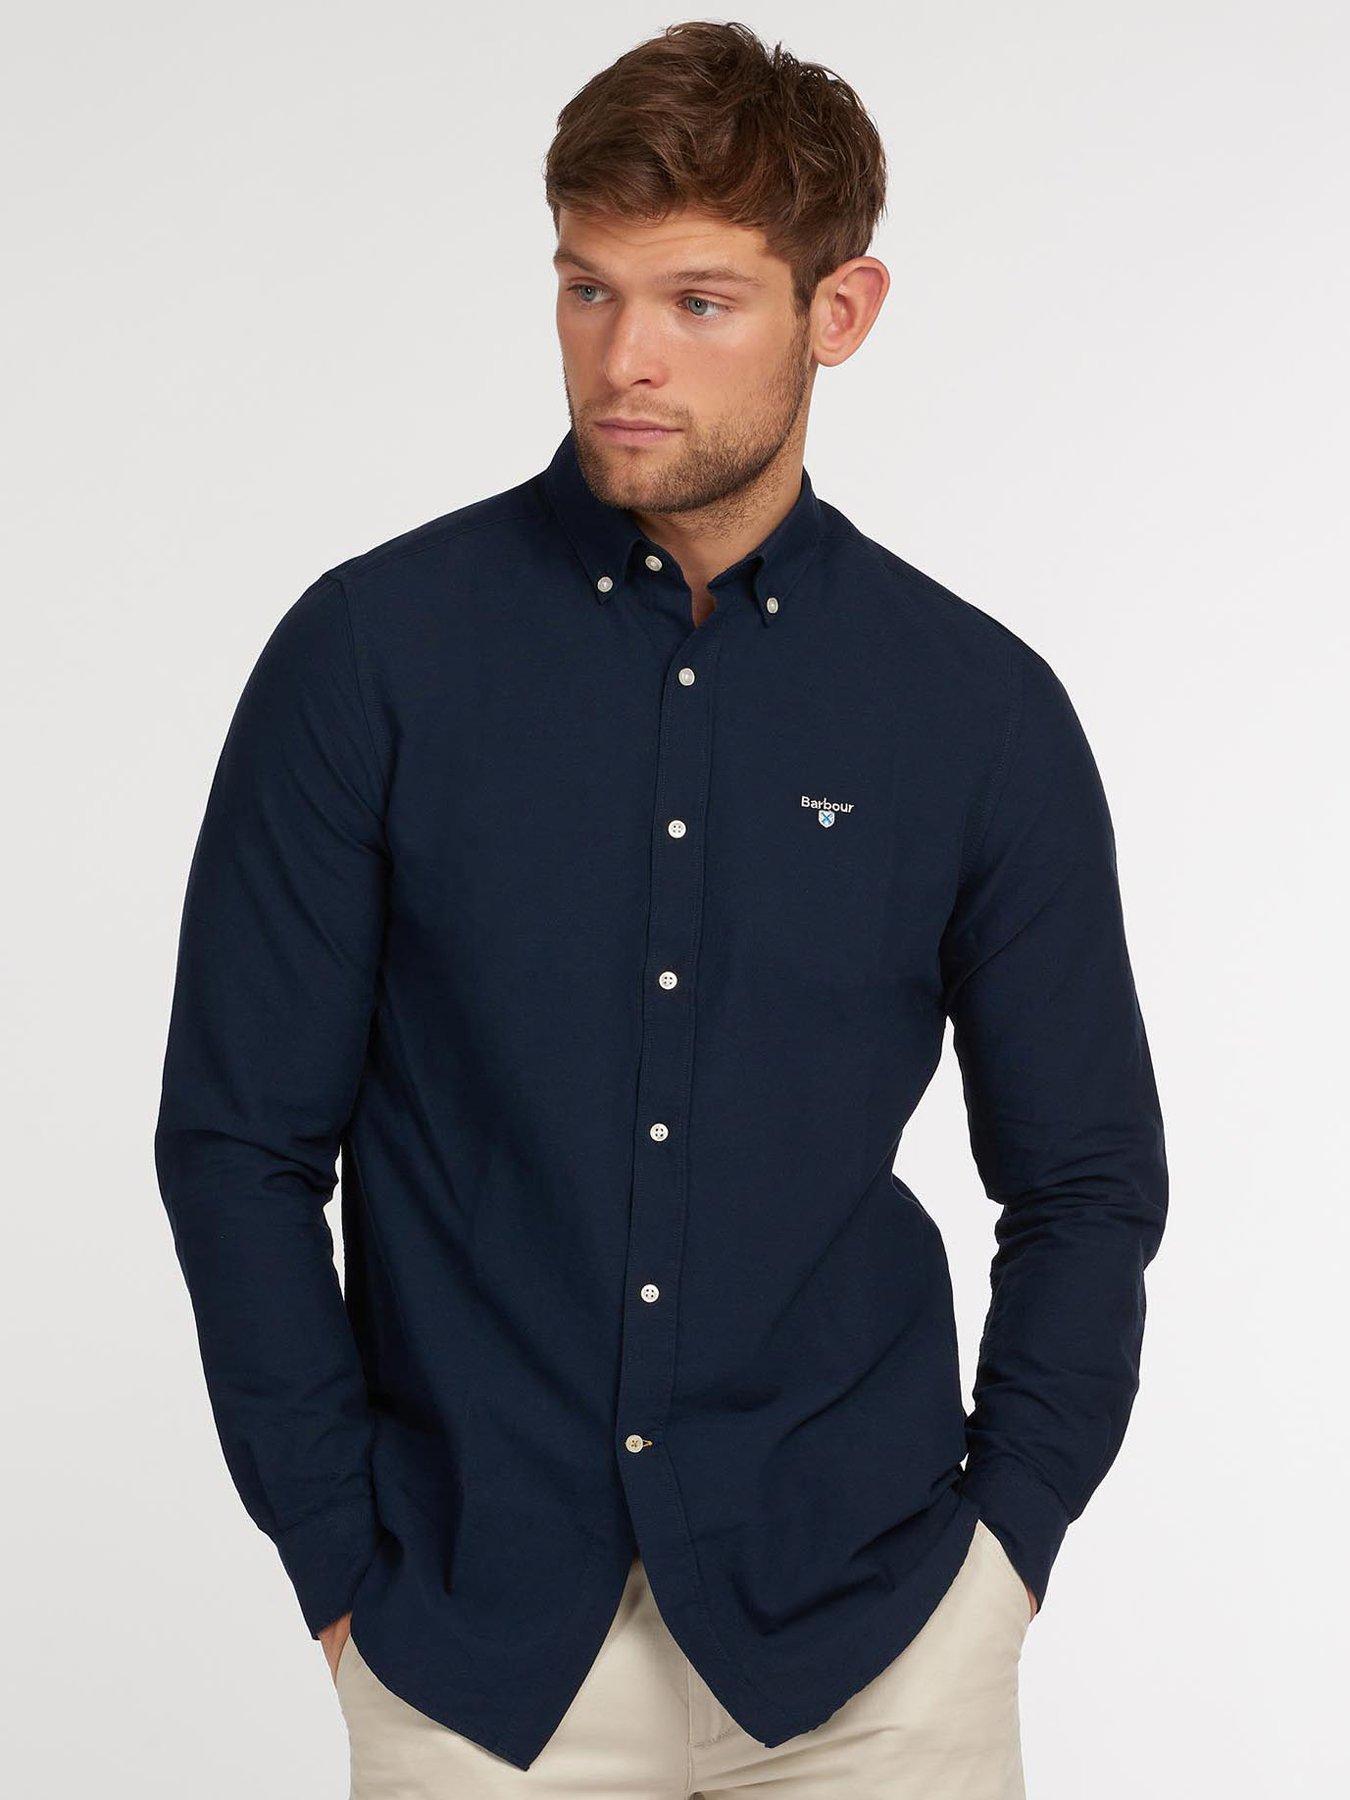  Oxford Tailored Shirt - Navy